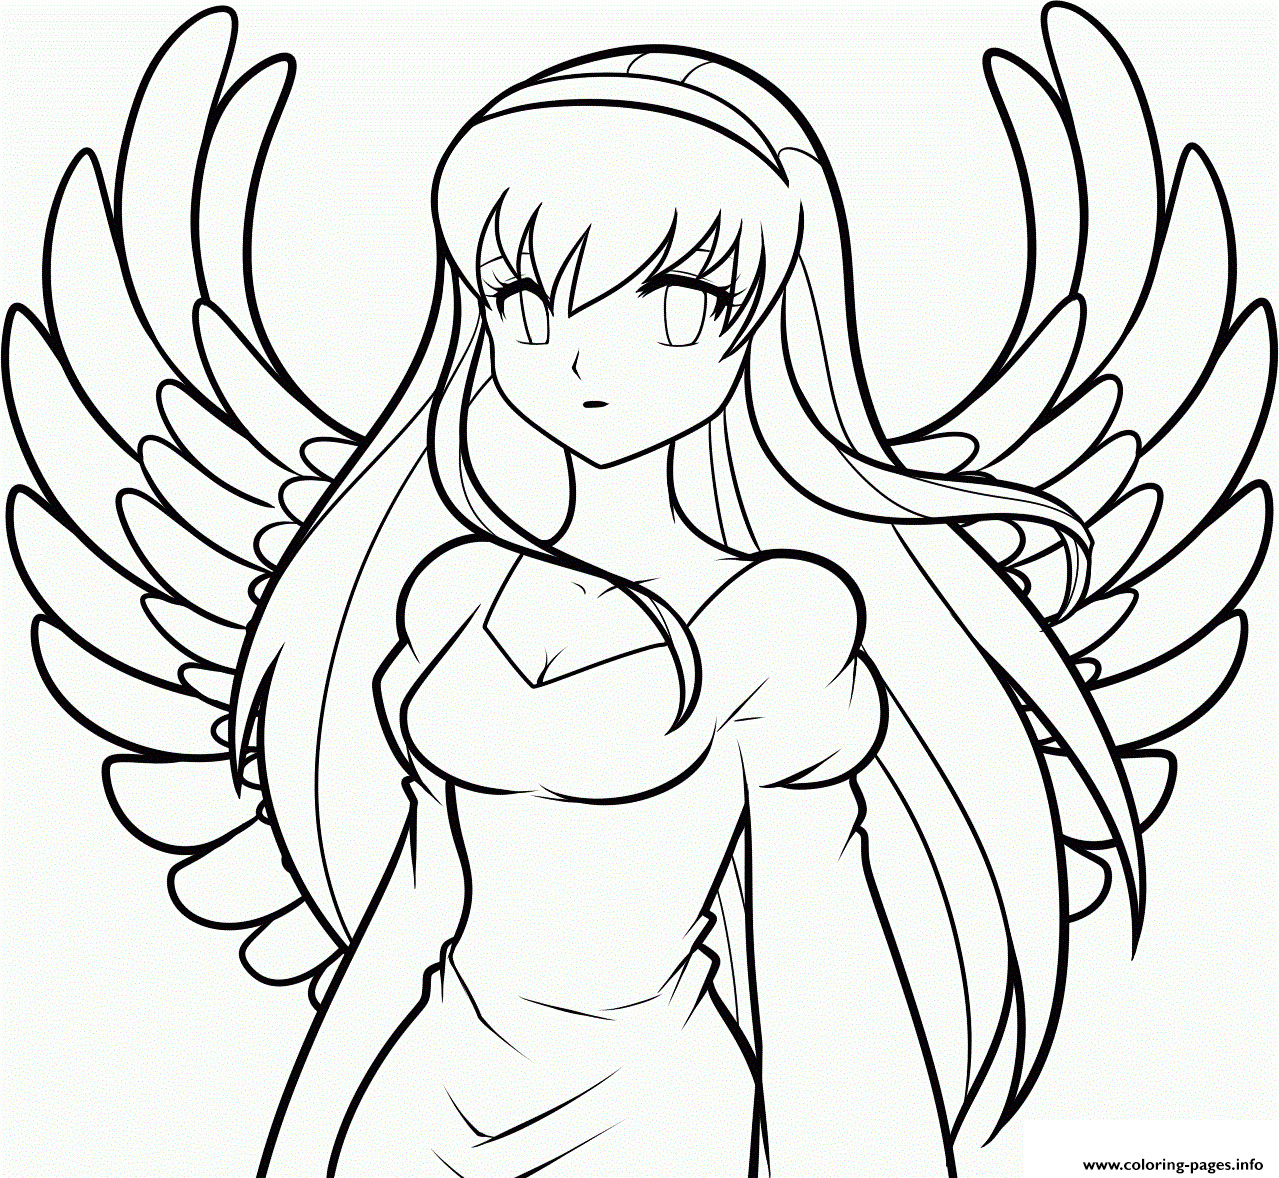 Anime Angel Girl Coloring Pages
 Easy Drawings To Draw Anime Angel Girl Coloring Pages